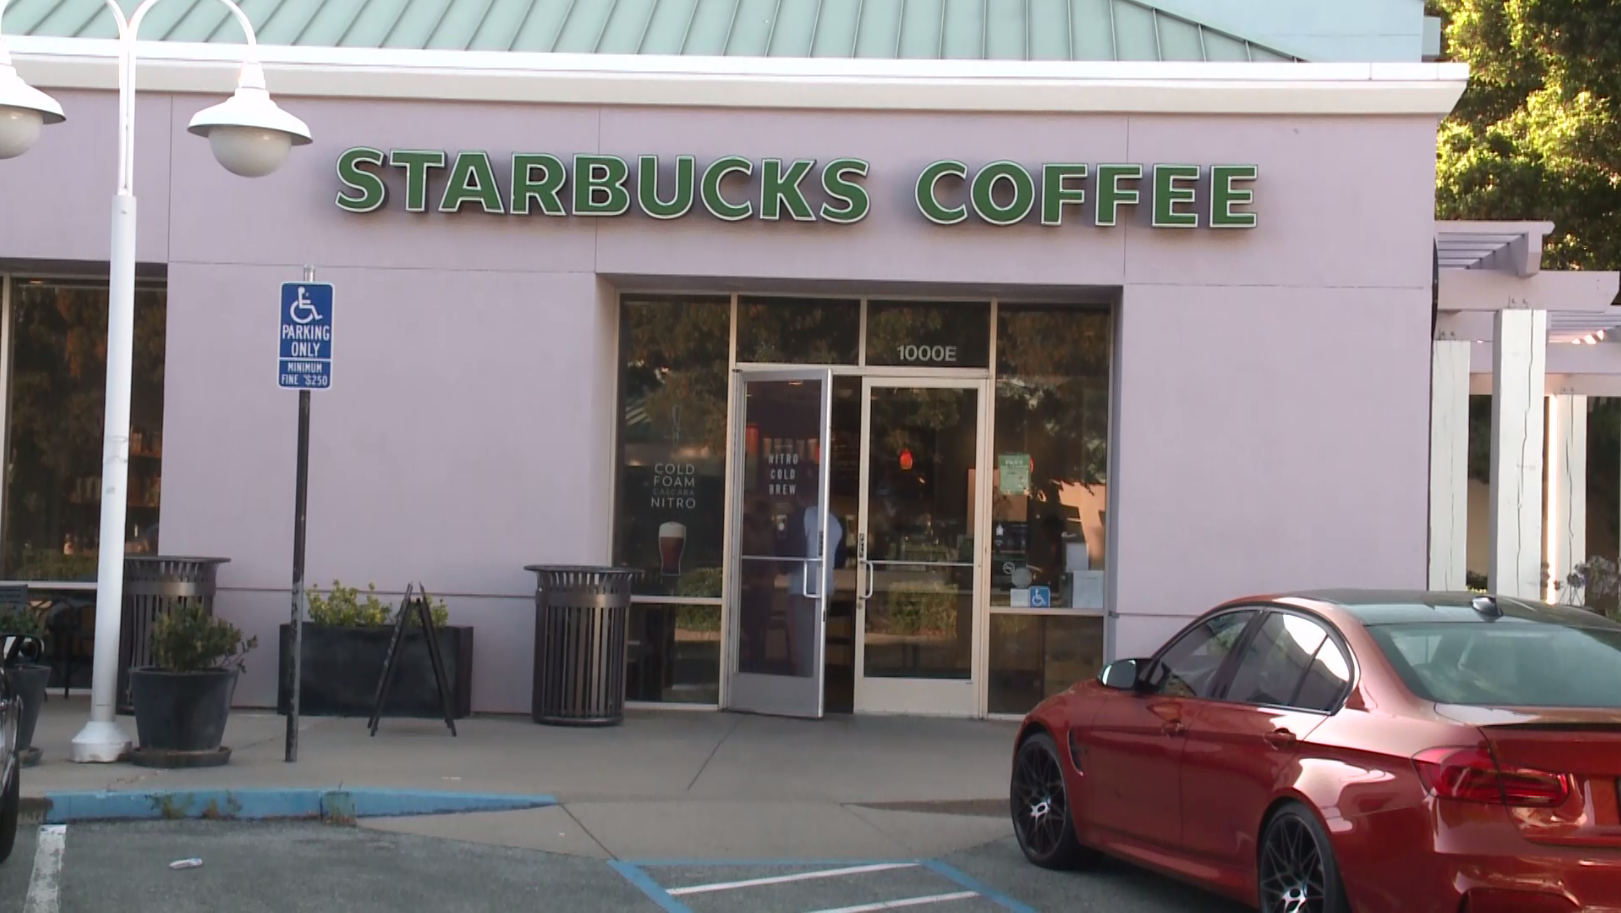 Starbucks in Foster City where a laptop theft took place on August 4, 2019. (CBS)